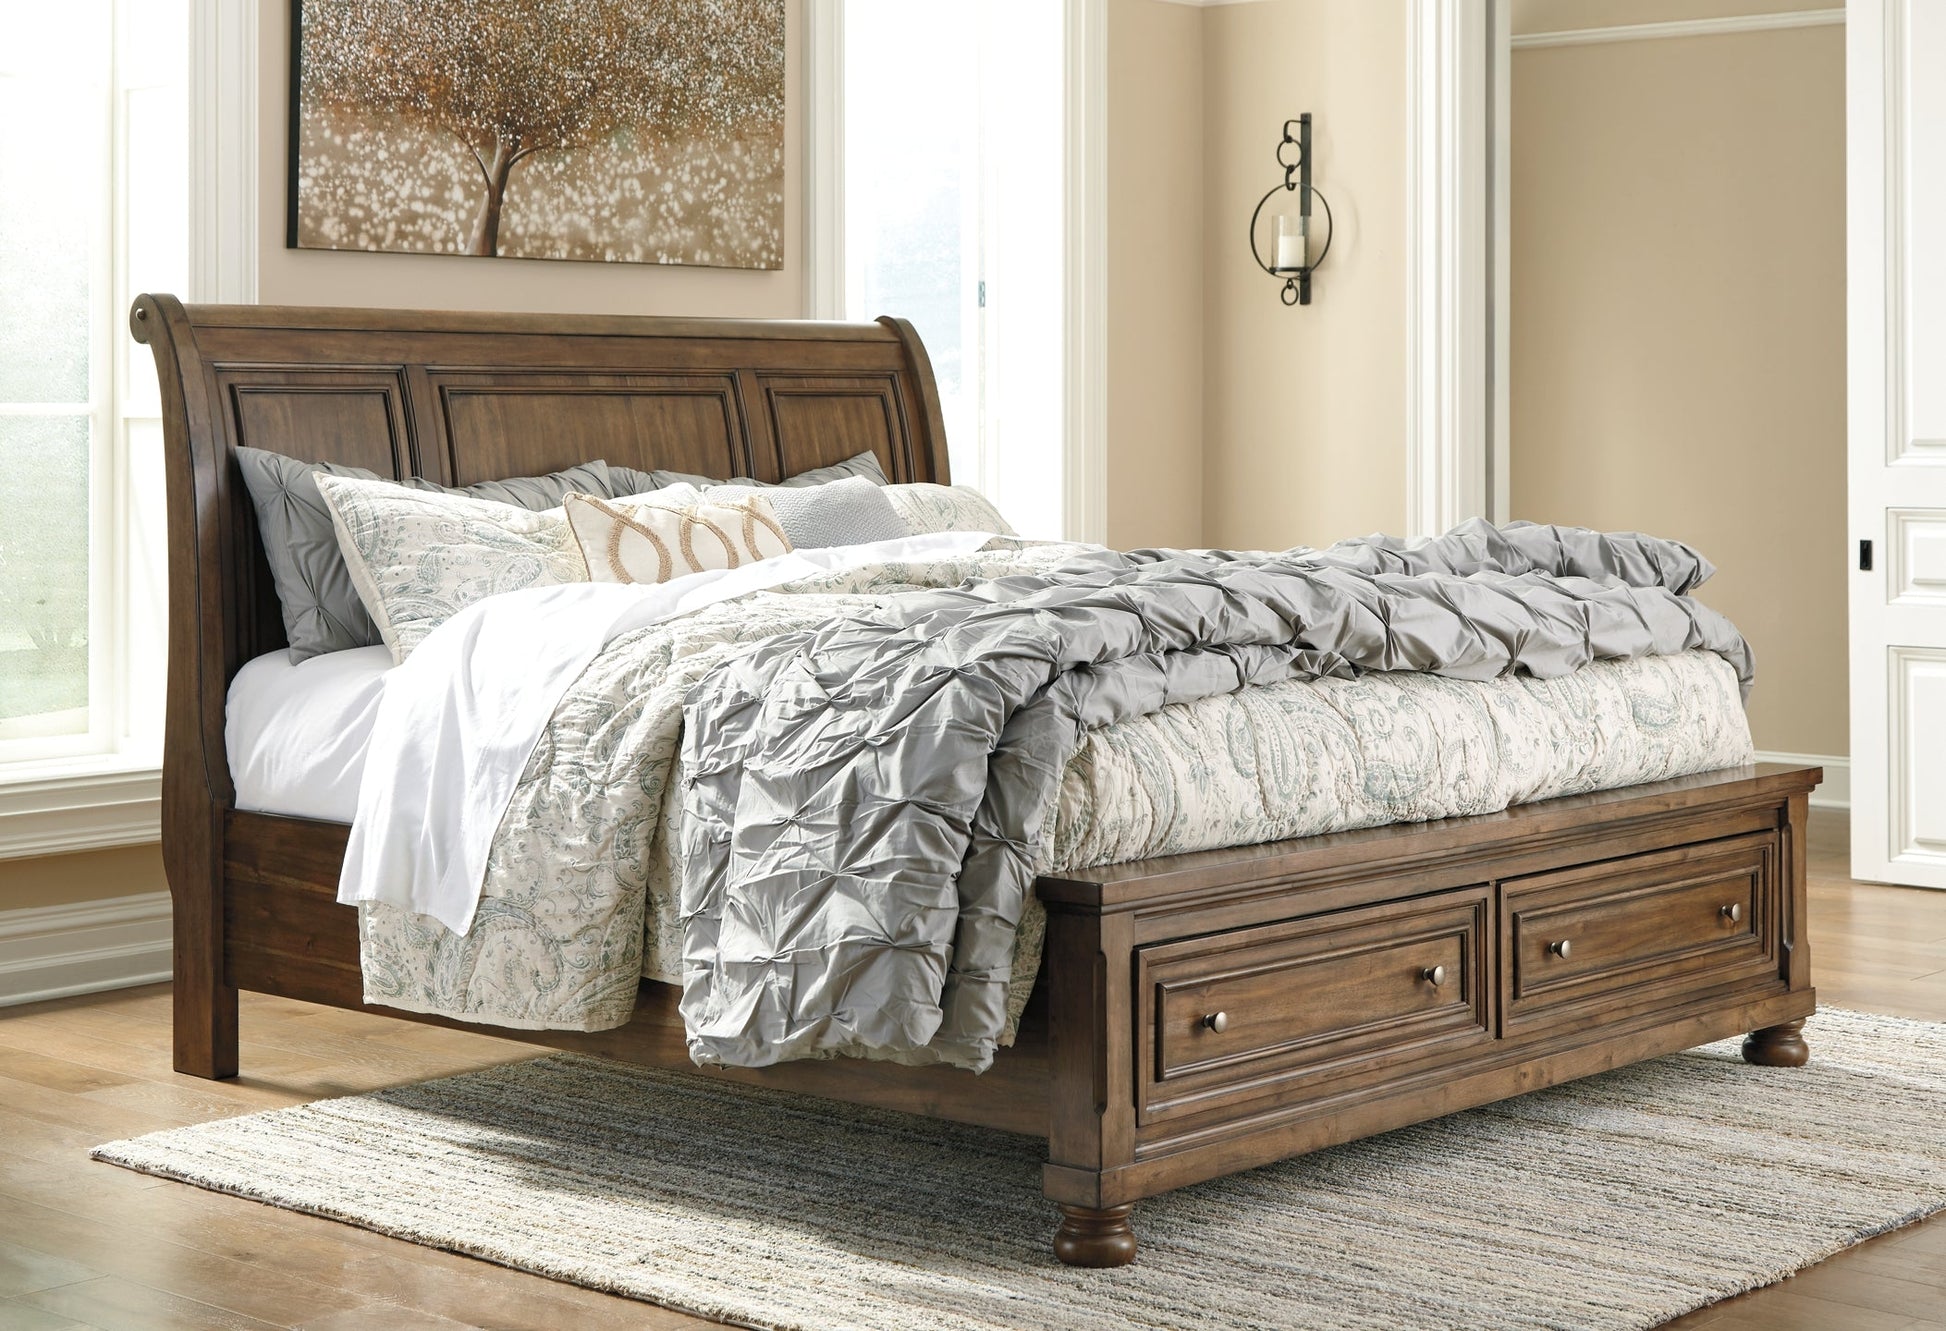 Flynnter Queen Sleigh Bed with 2 Storage Drawers with Dresser with Dresser Smyrna Furniture Outlet